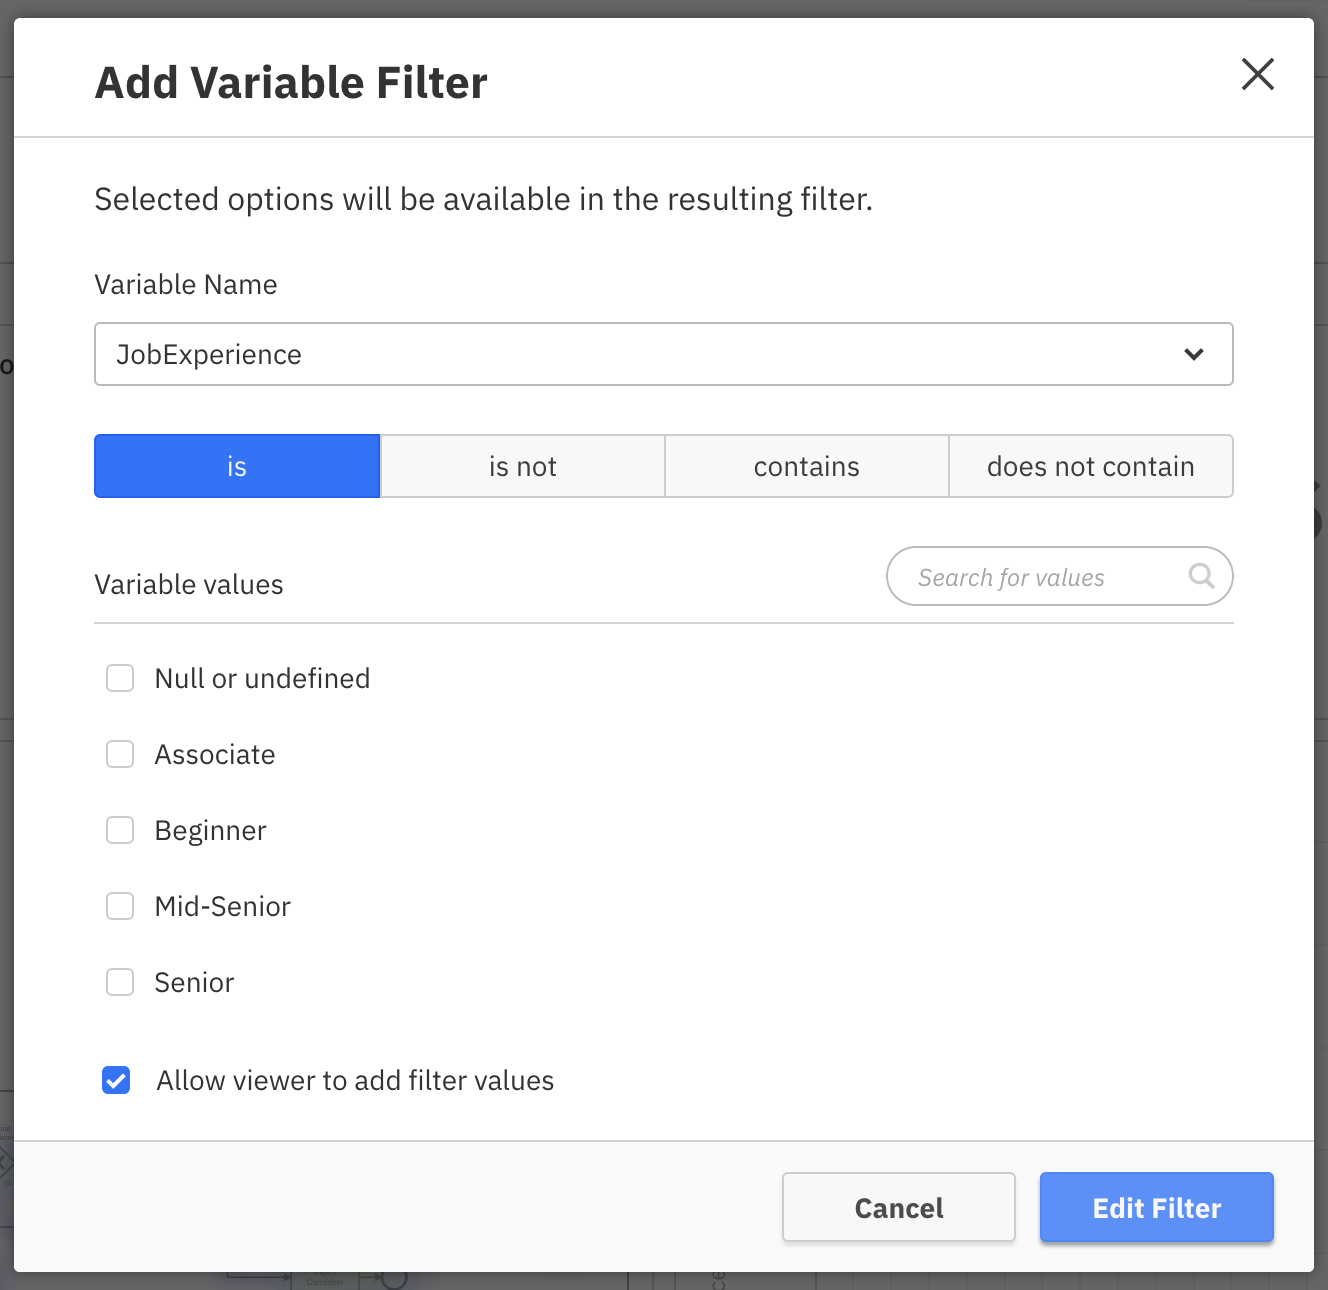 allow viewer to add filter values